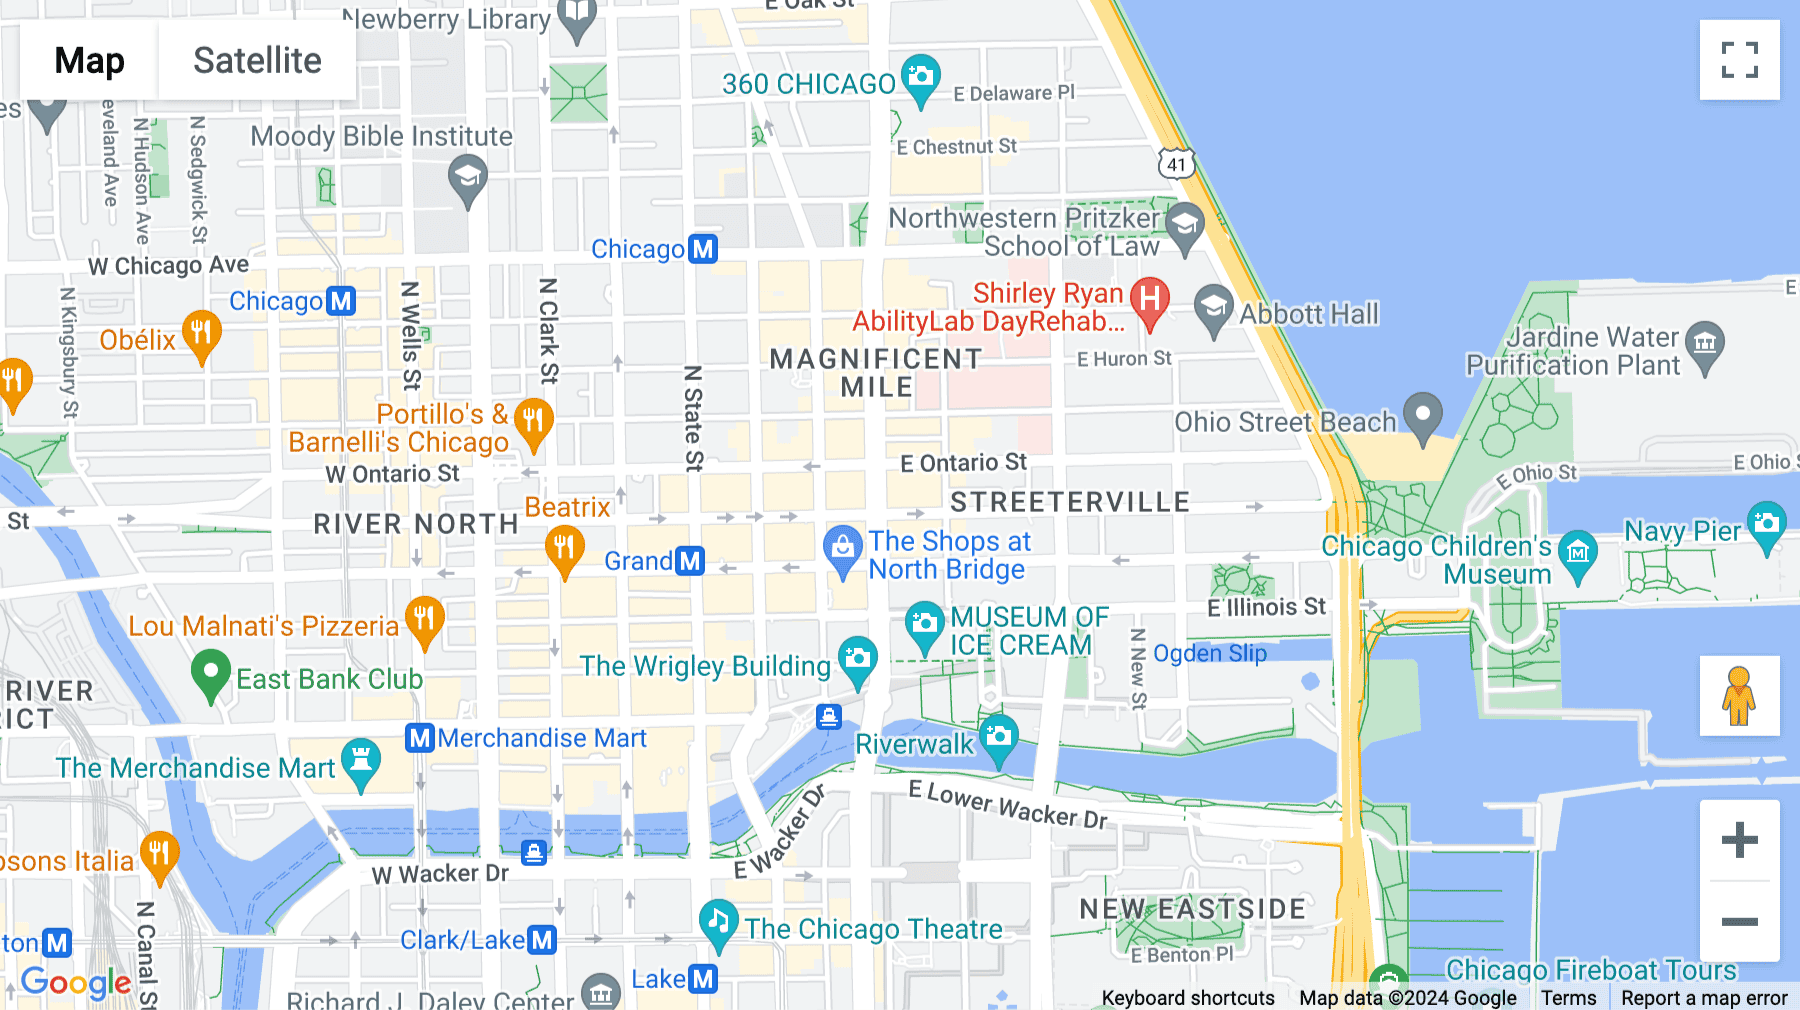 Click for interative map of 605 N. Michigan Avenue, 4th Floor, Chicago, Illinois, Chicago